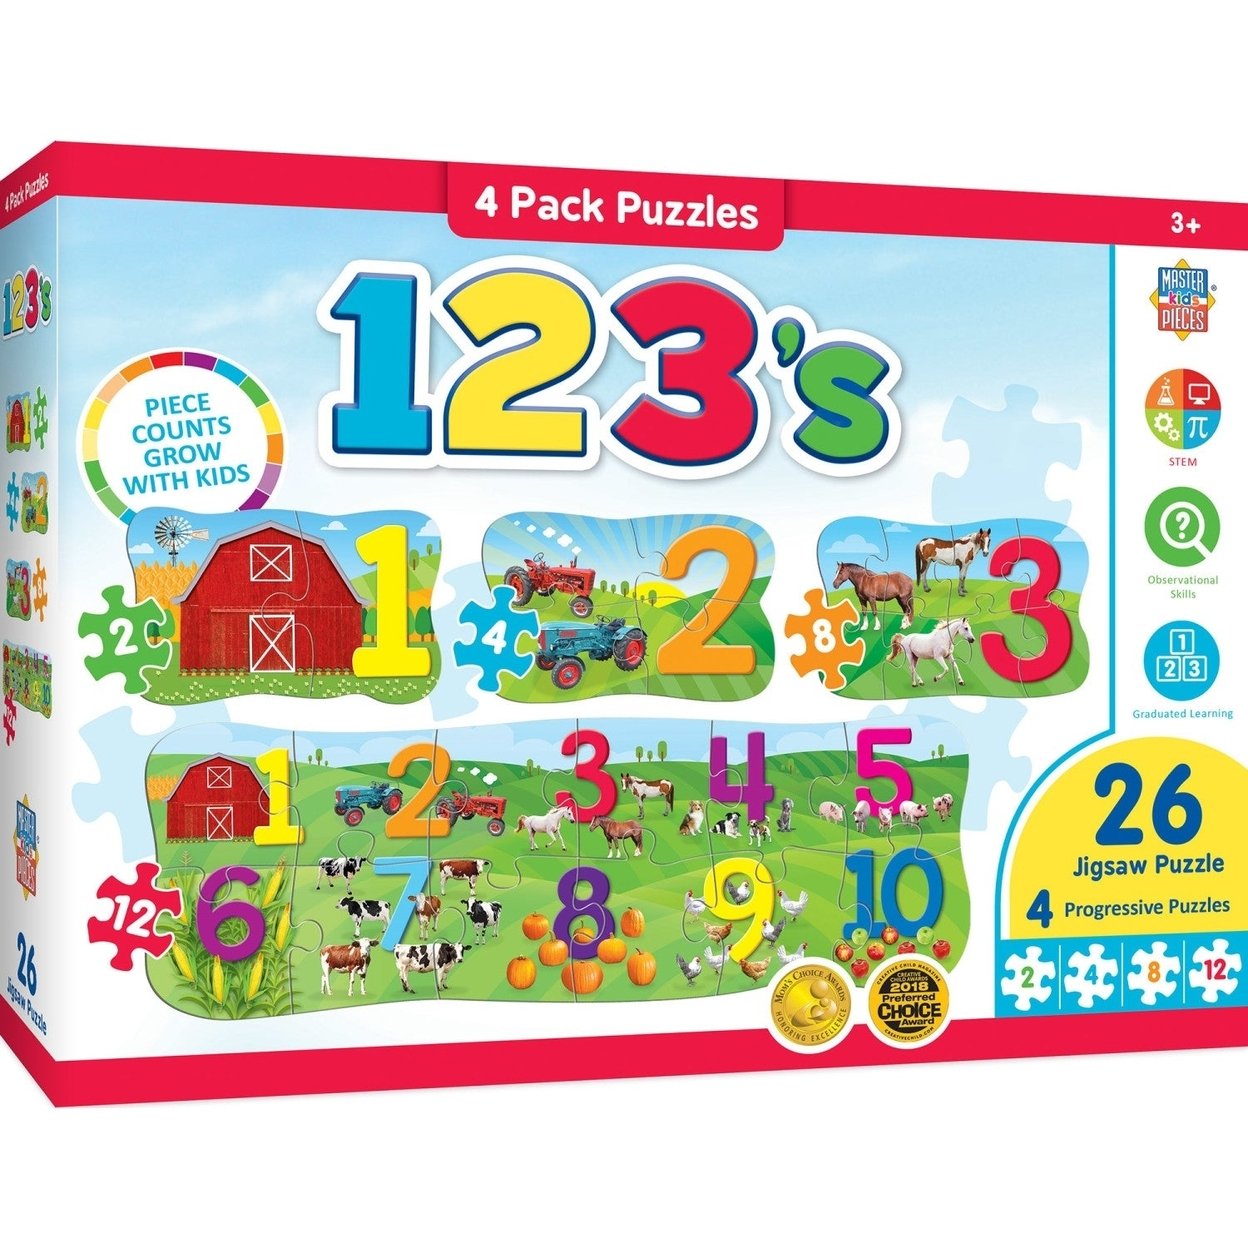 MasterPieces 123s - Educational 4-Pack Puzzles